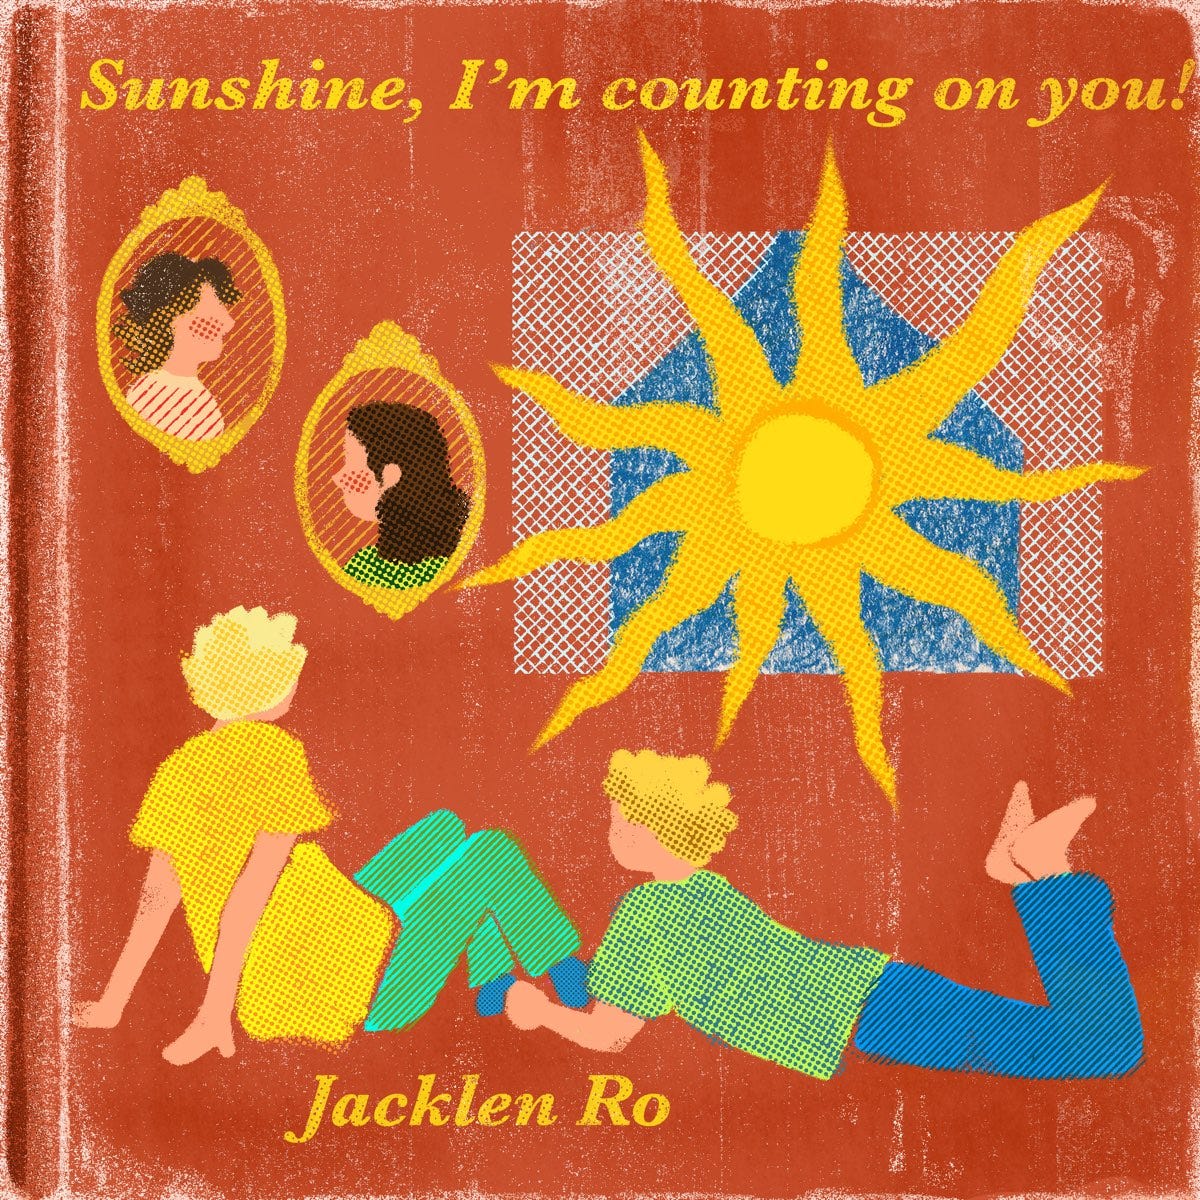 Sunshine, I'm Counting on You! - Album by Jacklen Ro - Apple Music